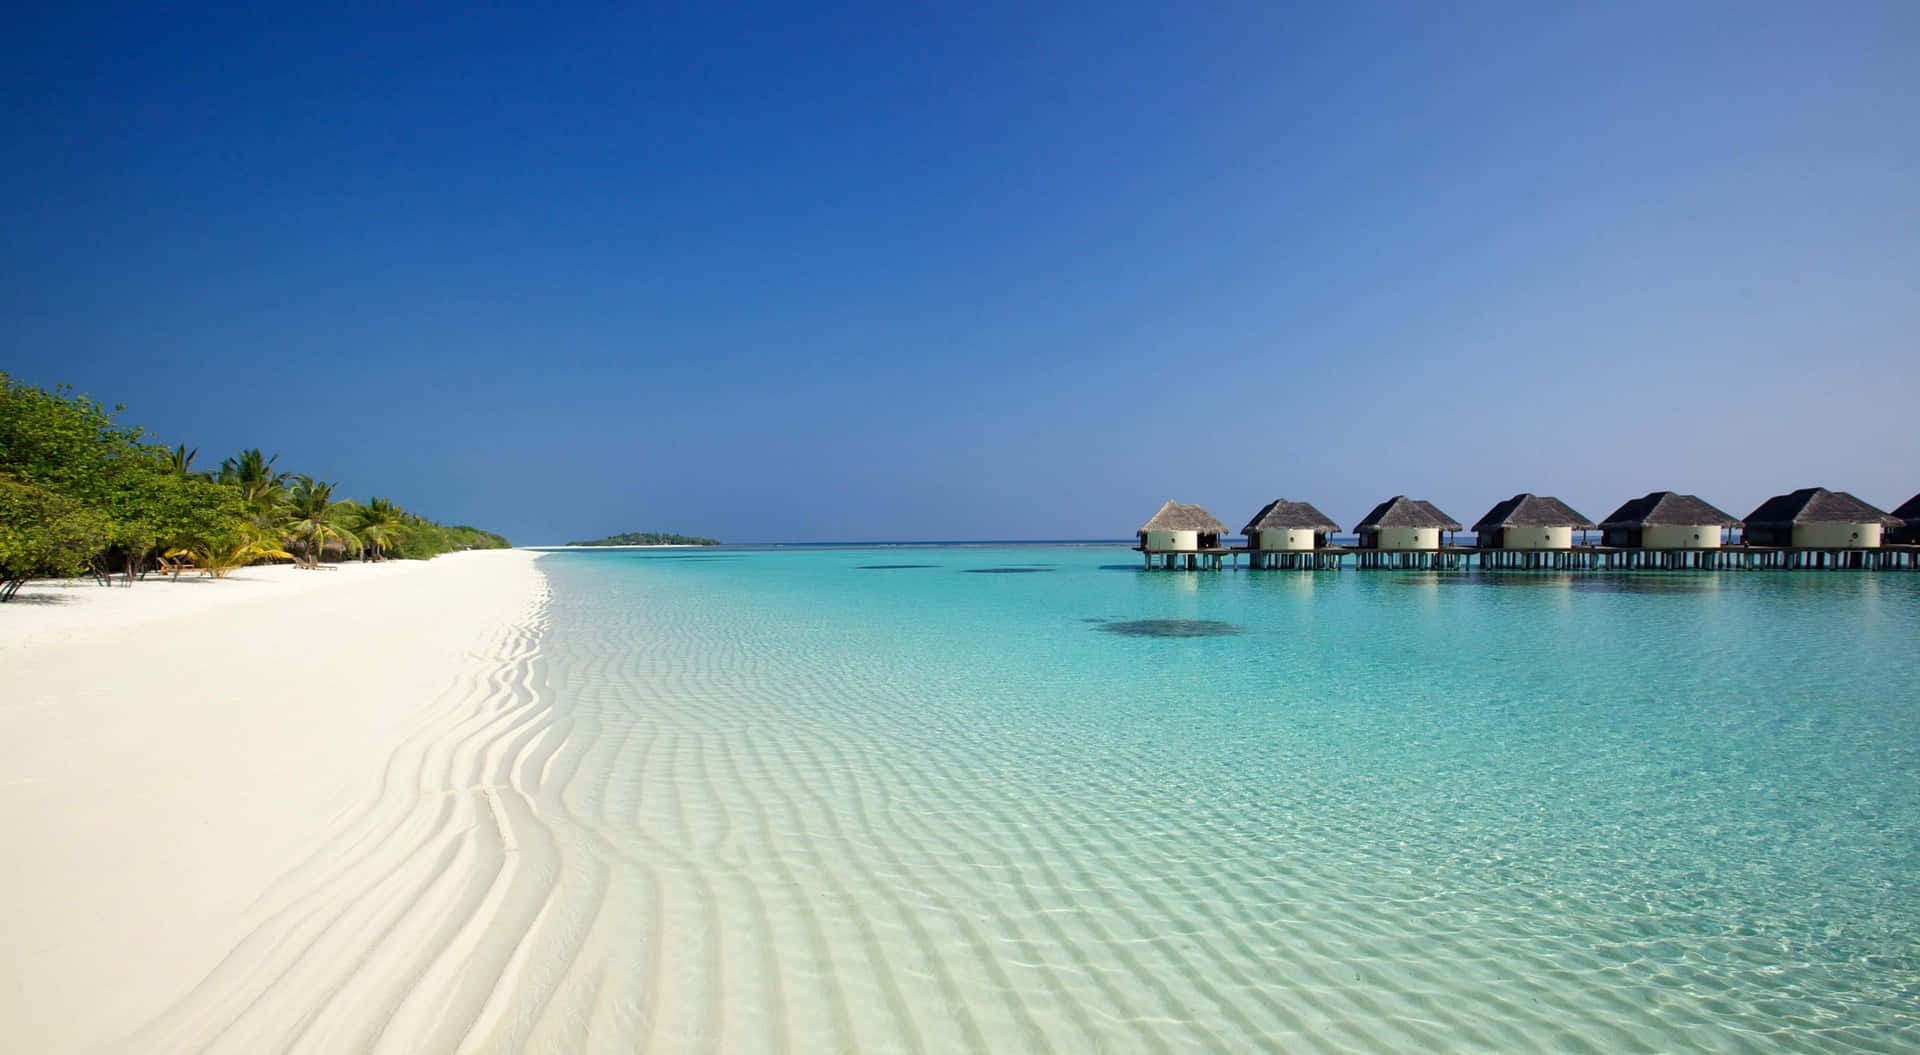 Enjoy the tranquility and serenity of the beach.